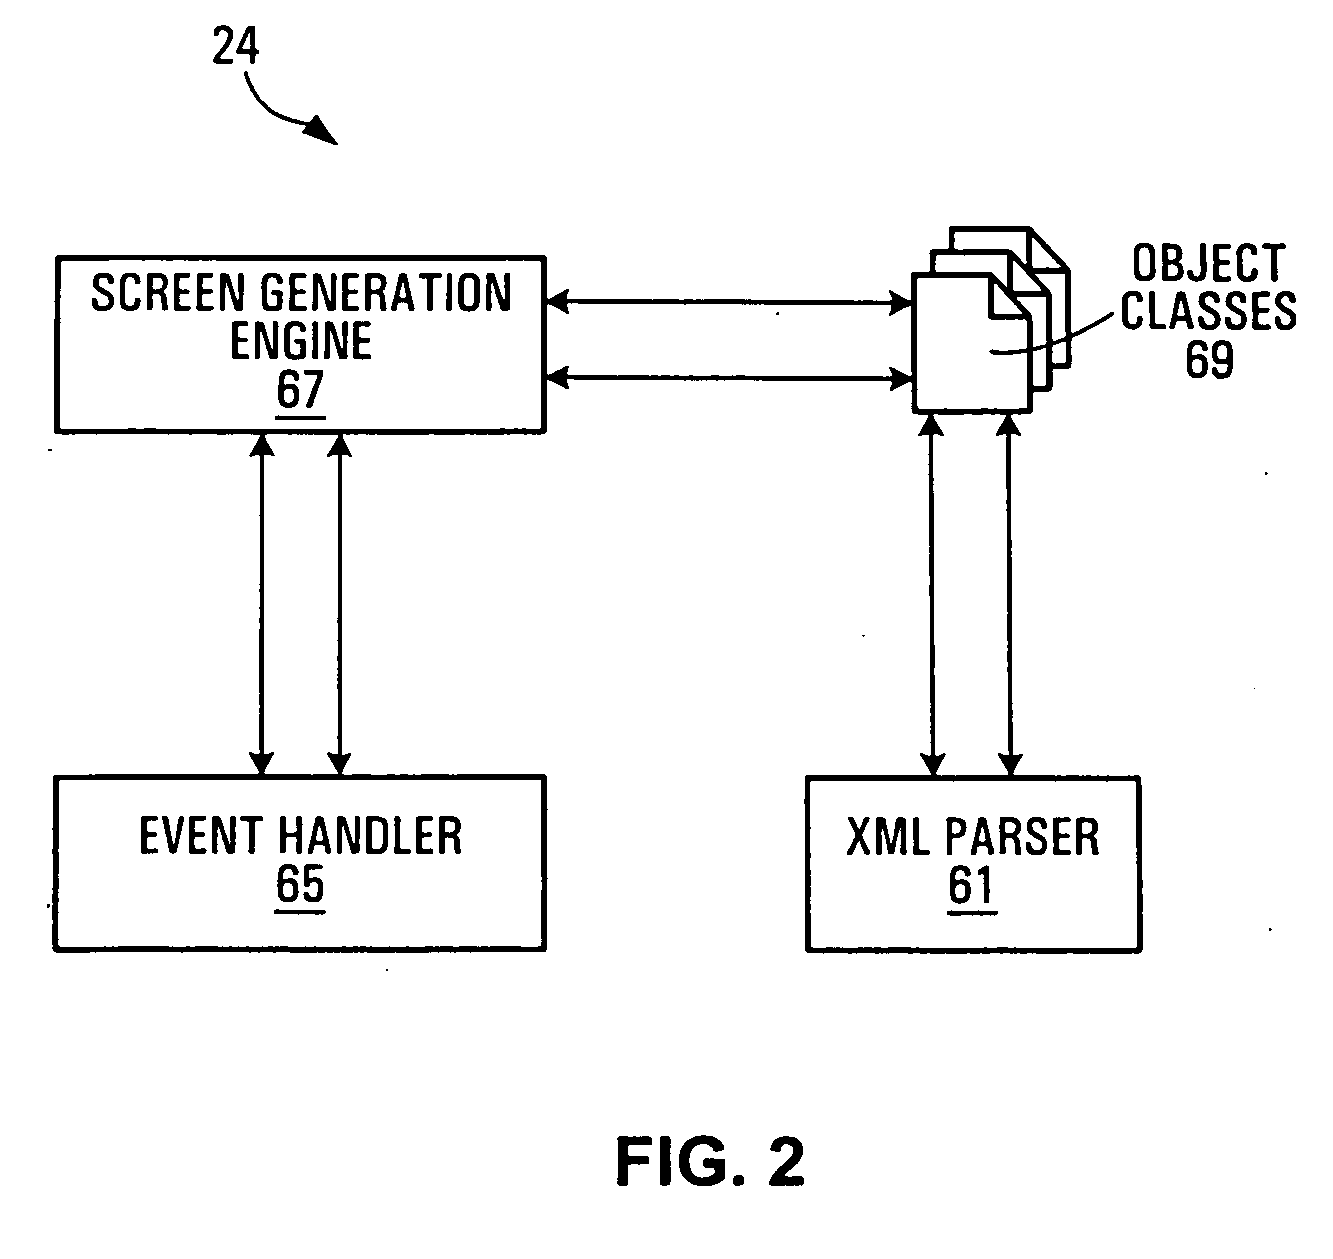 Mobile device having extensible sofware for presenting server-side applications, software and methods